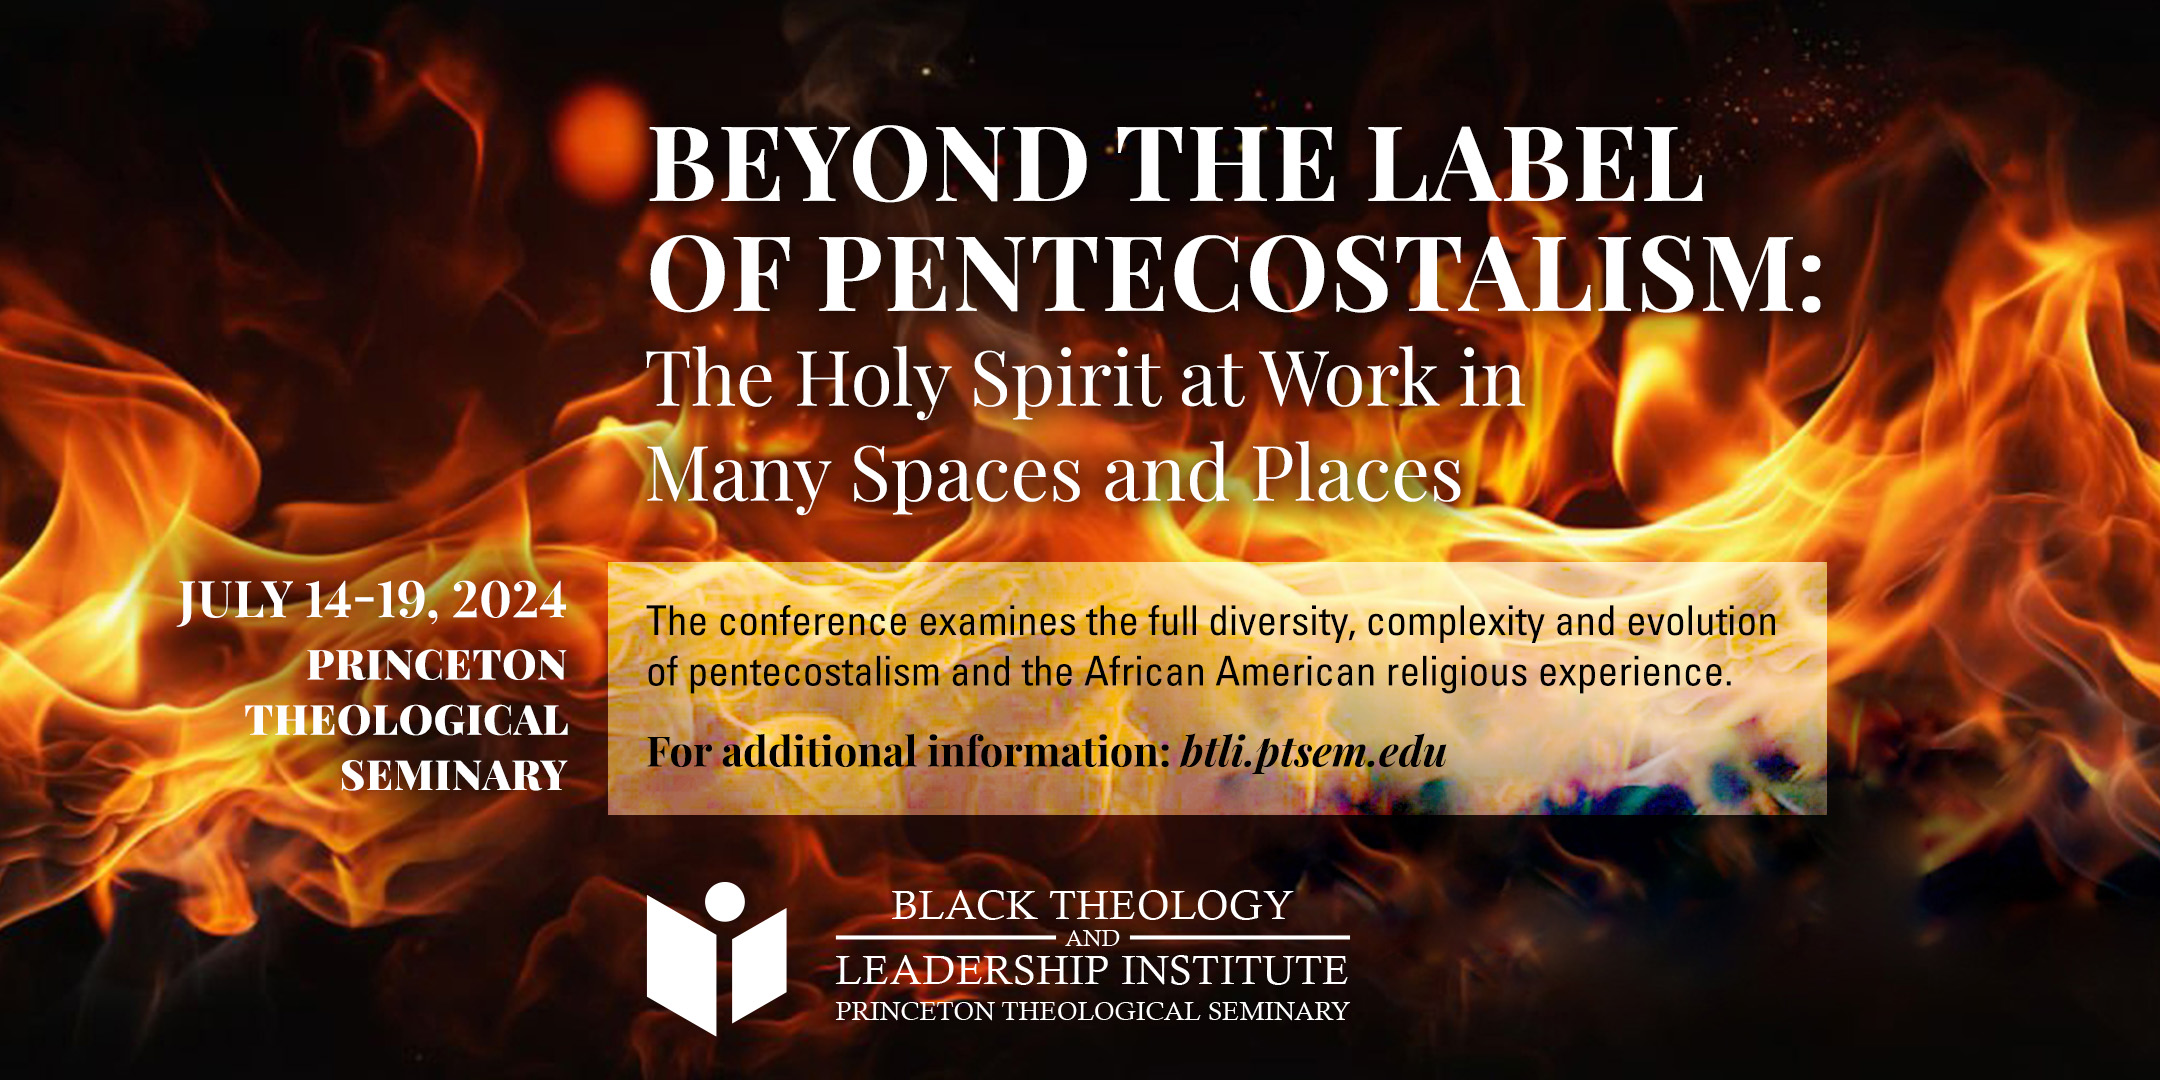 Beyond the Label of Pentecostalism event announcement.